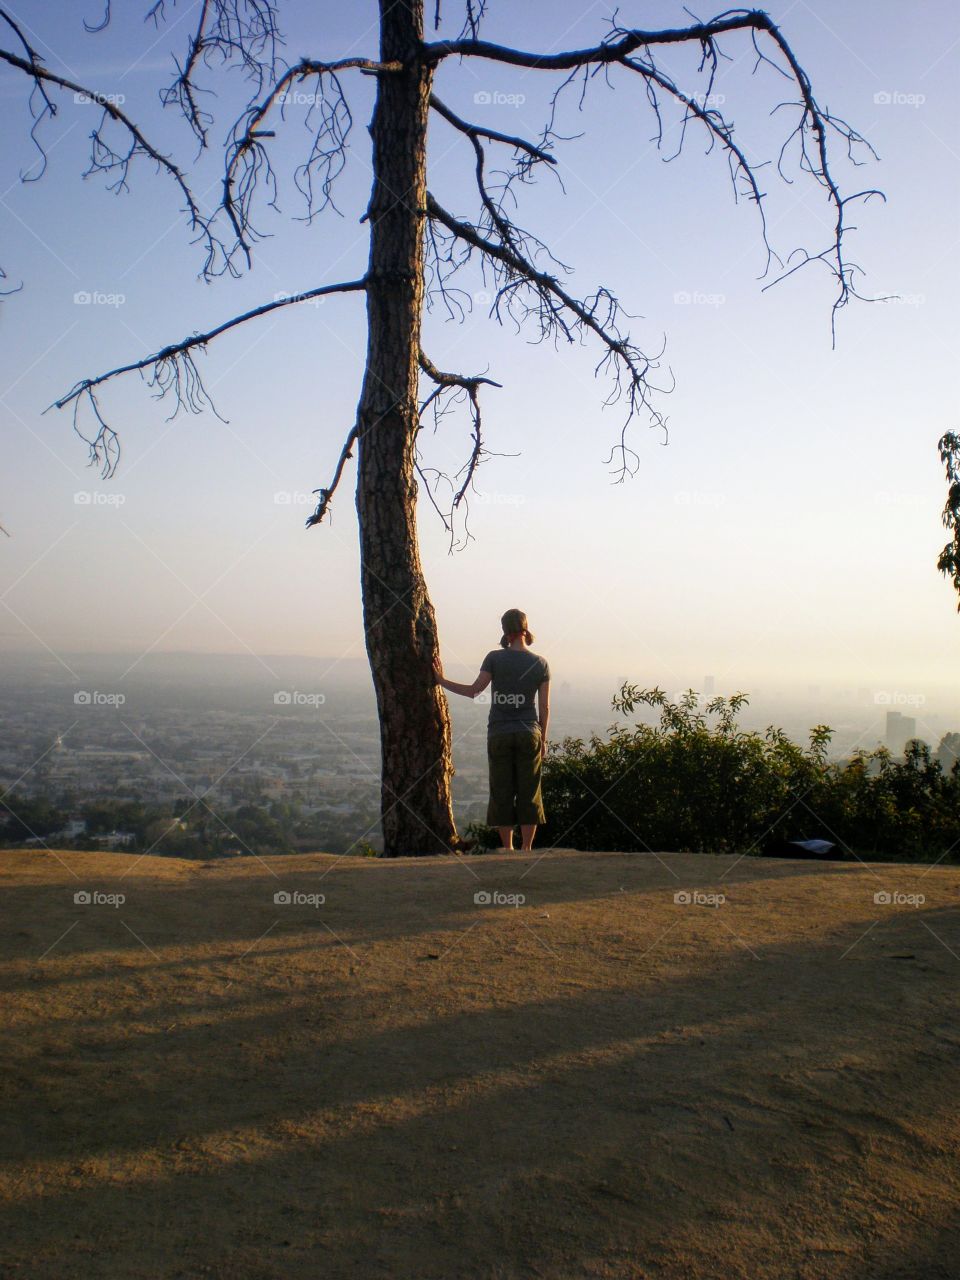 At Griffith Park looking out onto Las Angeles